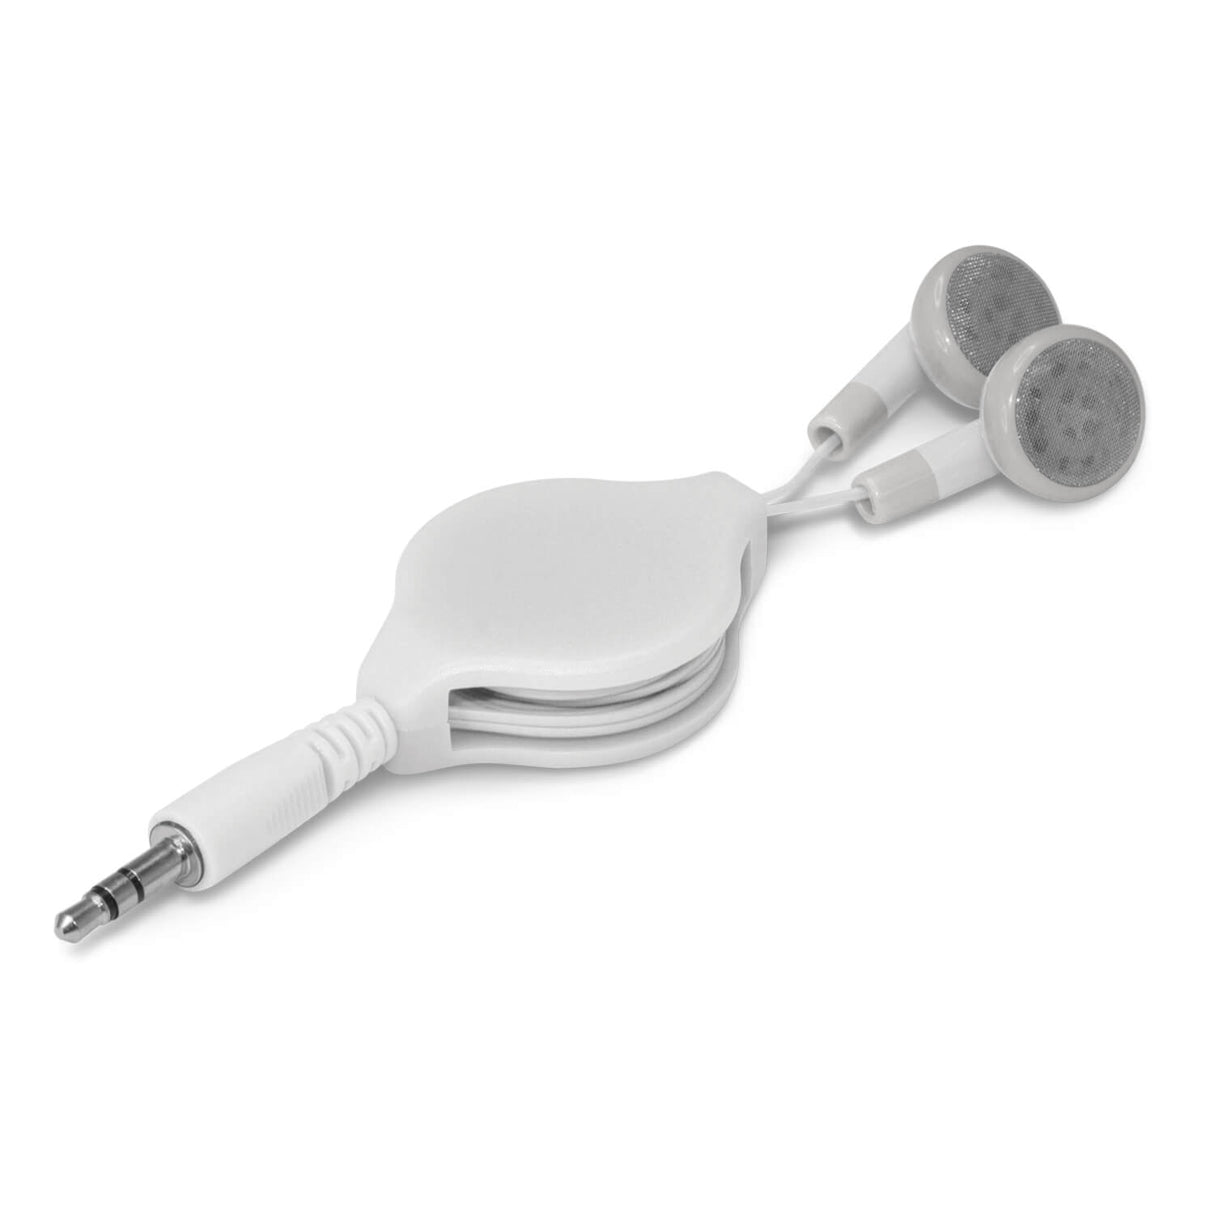 Retractable Earbuds - Full Colour Printed